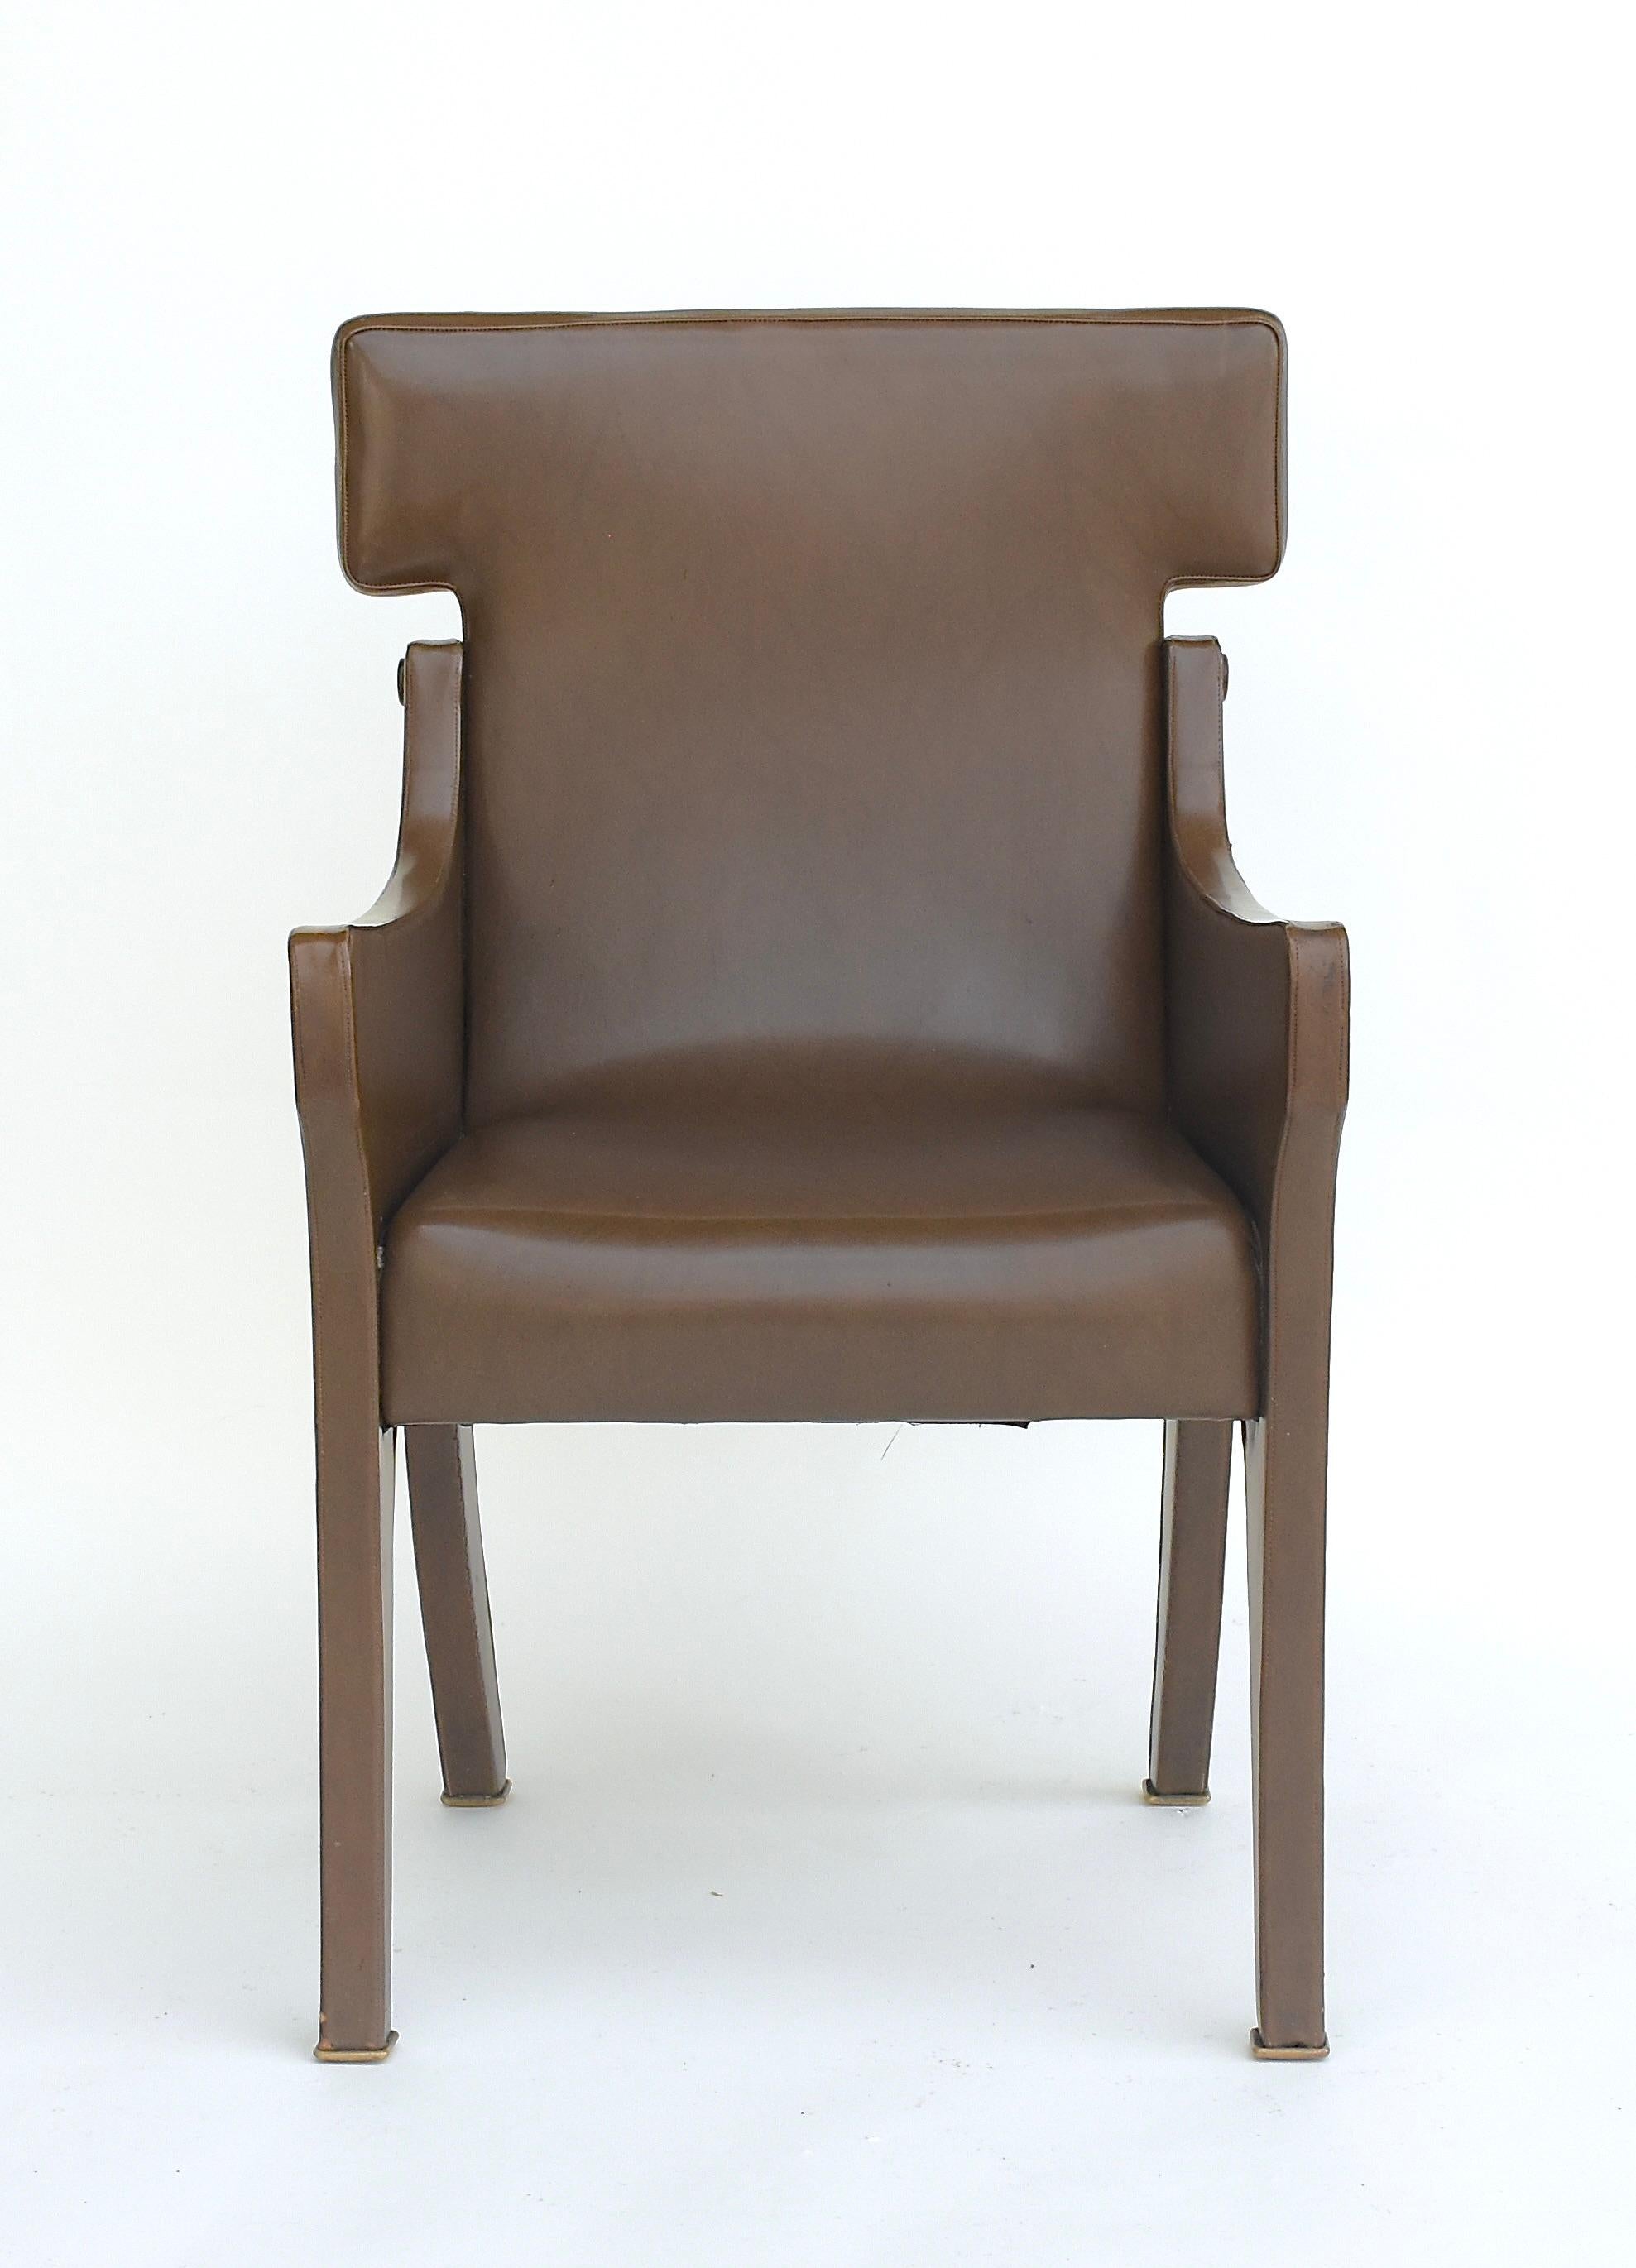 A hard to find original Ignazio Gardella R63 Armchair for Azucena in Olive Brown synthetic vinyl leather that was used at the times by many furniture designers. The chair maintains the original upholstery from 1963.
A great hard to find chair with